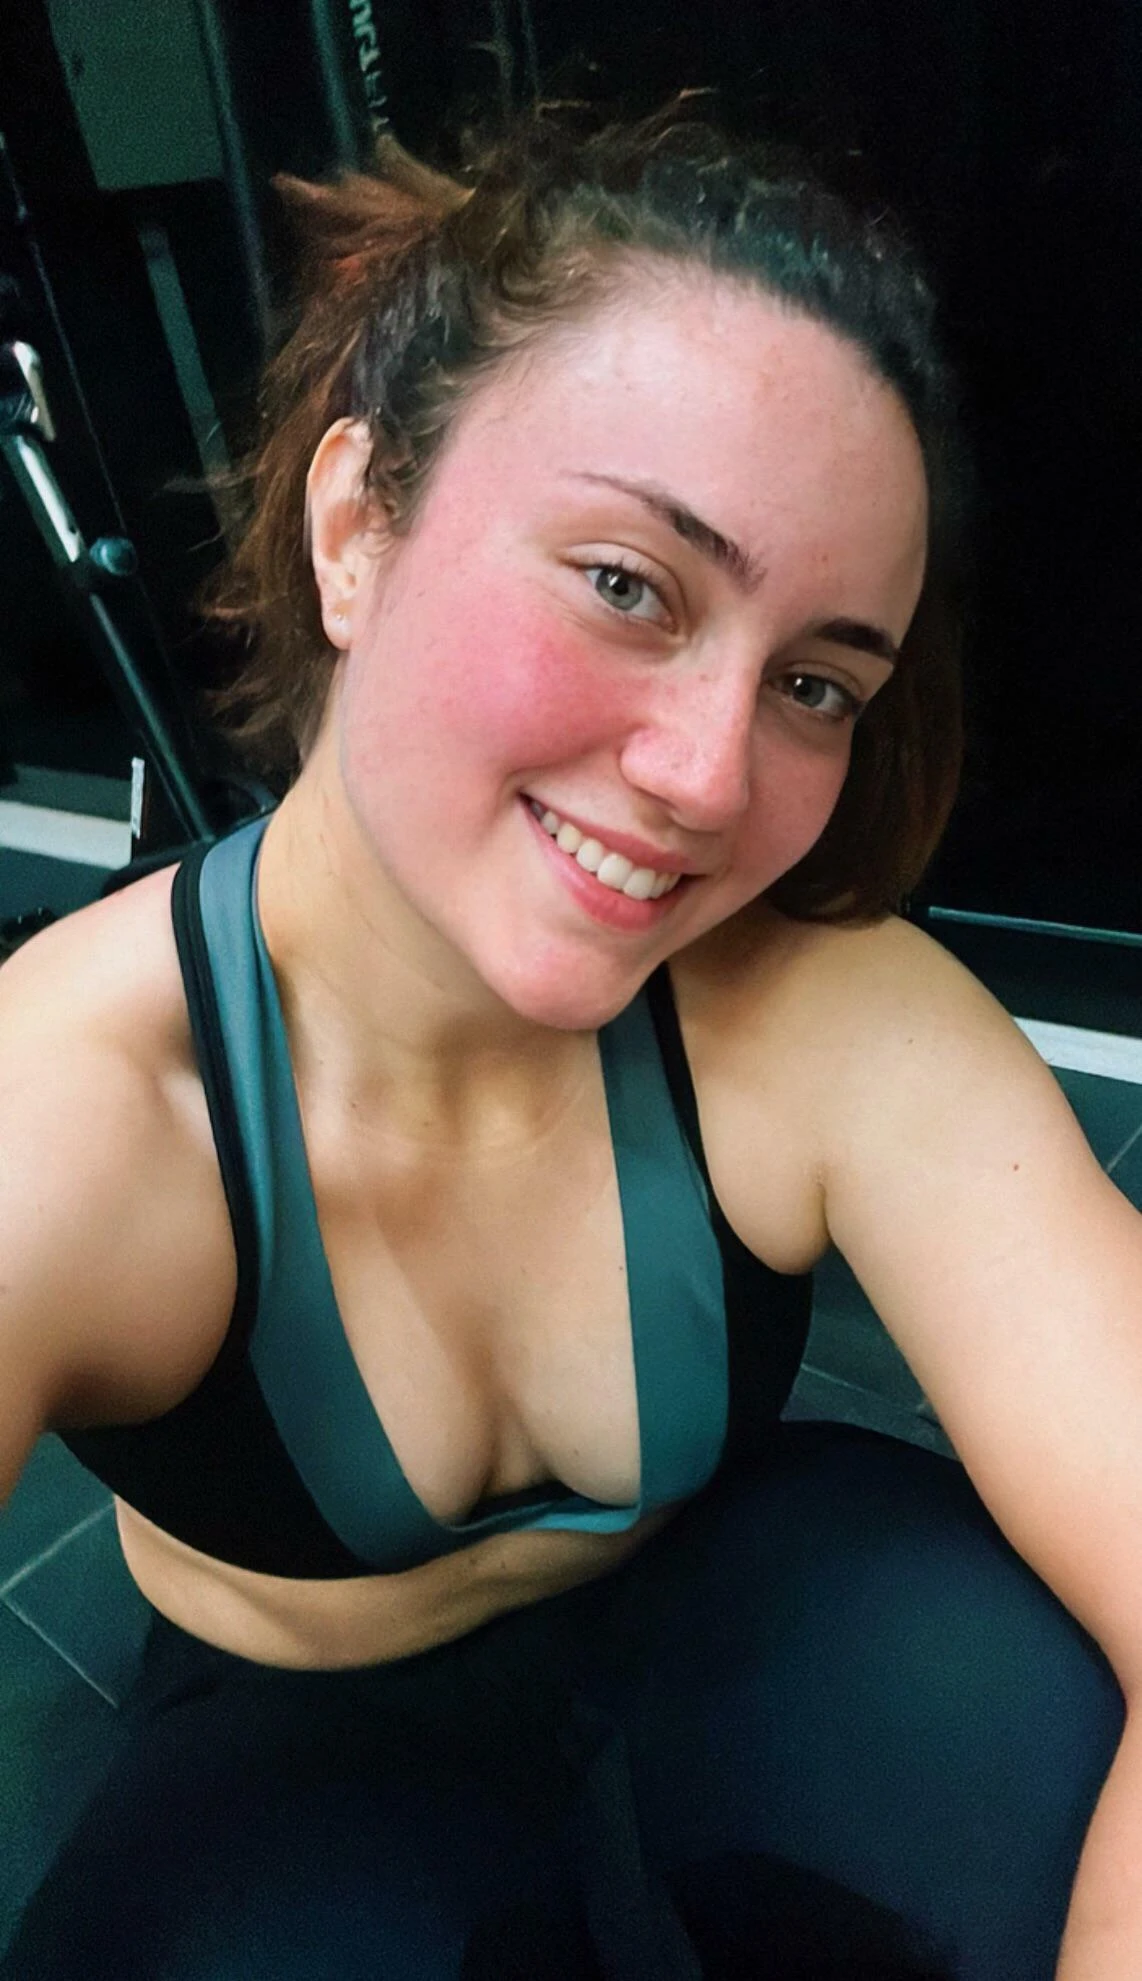 Some after workout selfie